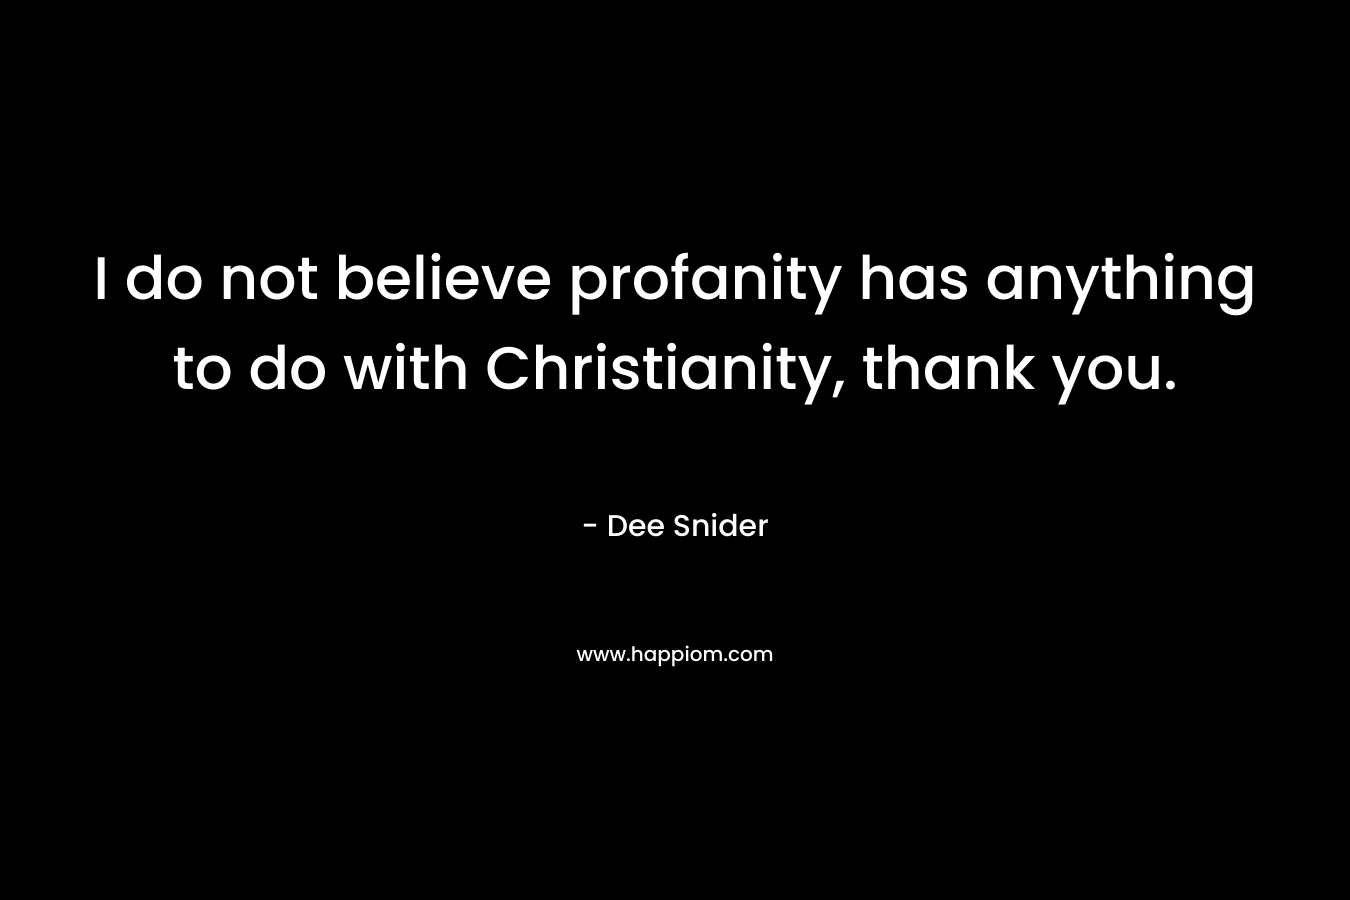 I do not believe profanity has anything to do with Christianity, thank you.